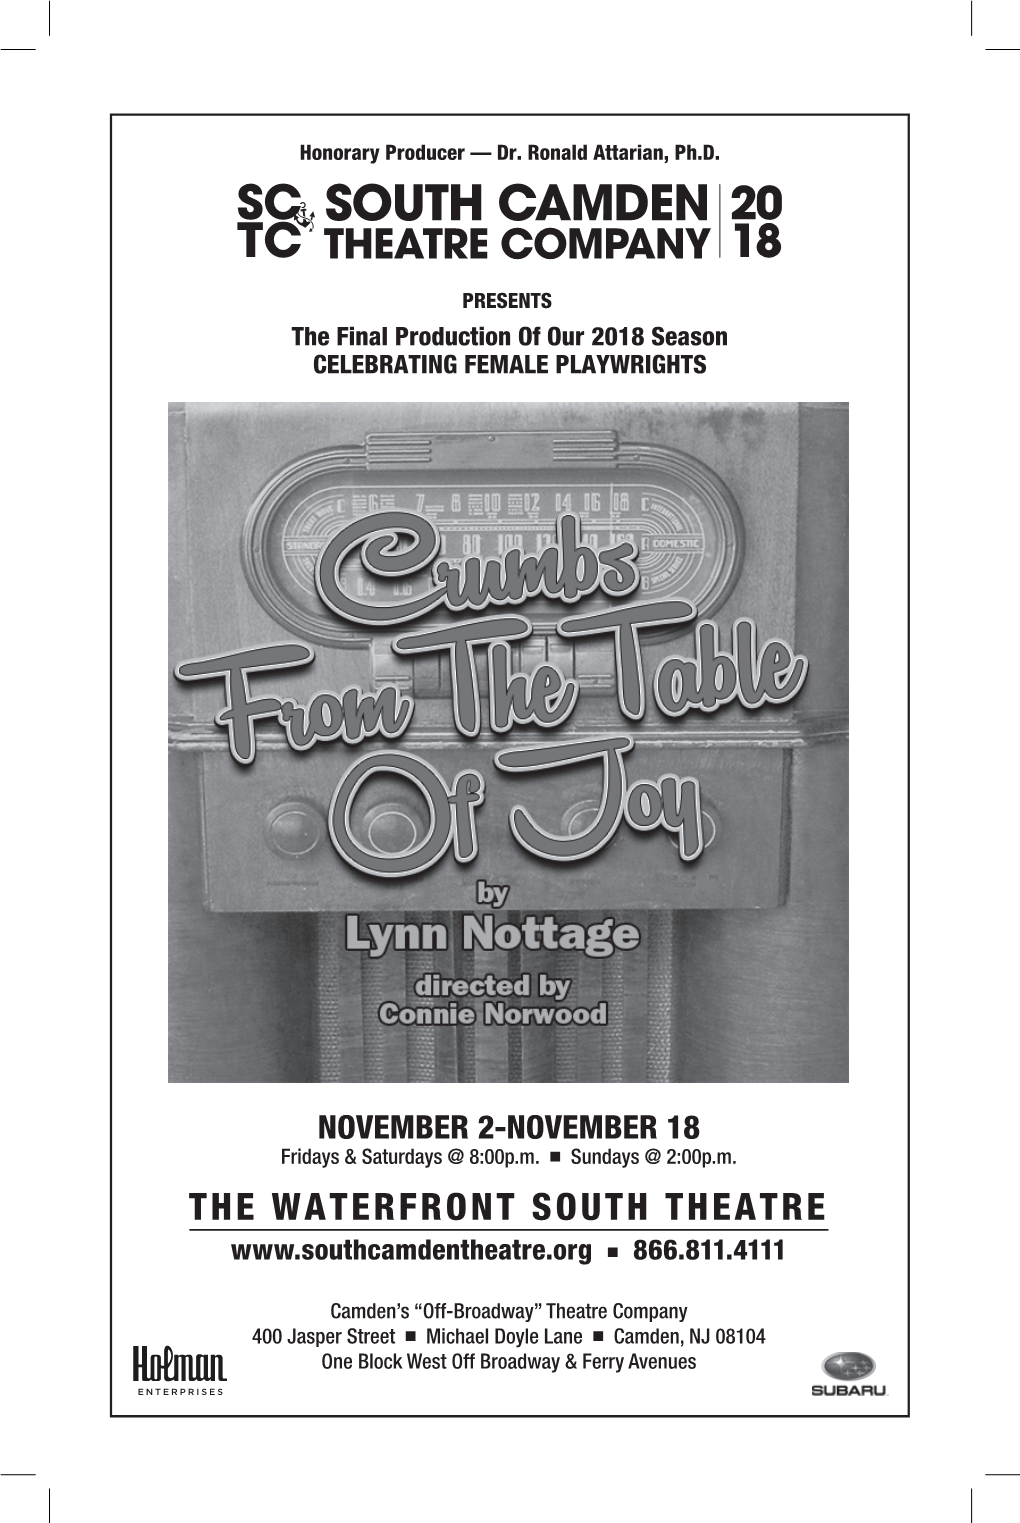 The Waterfront South Theatre ■ 866.811.4111